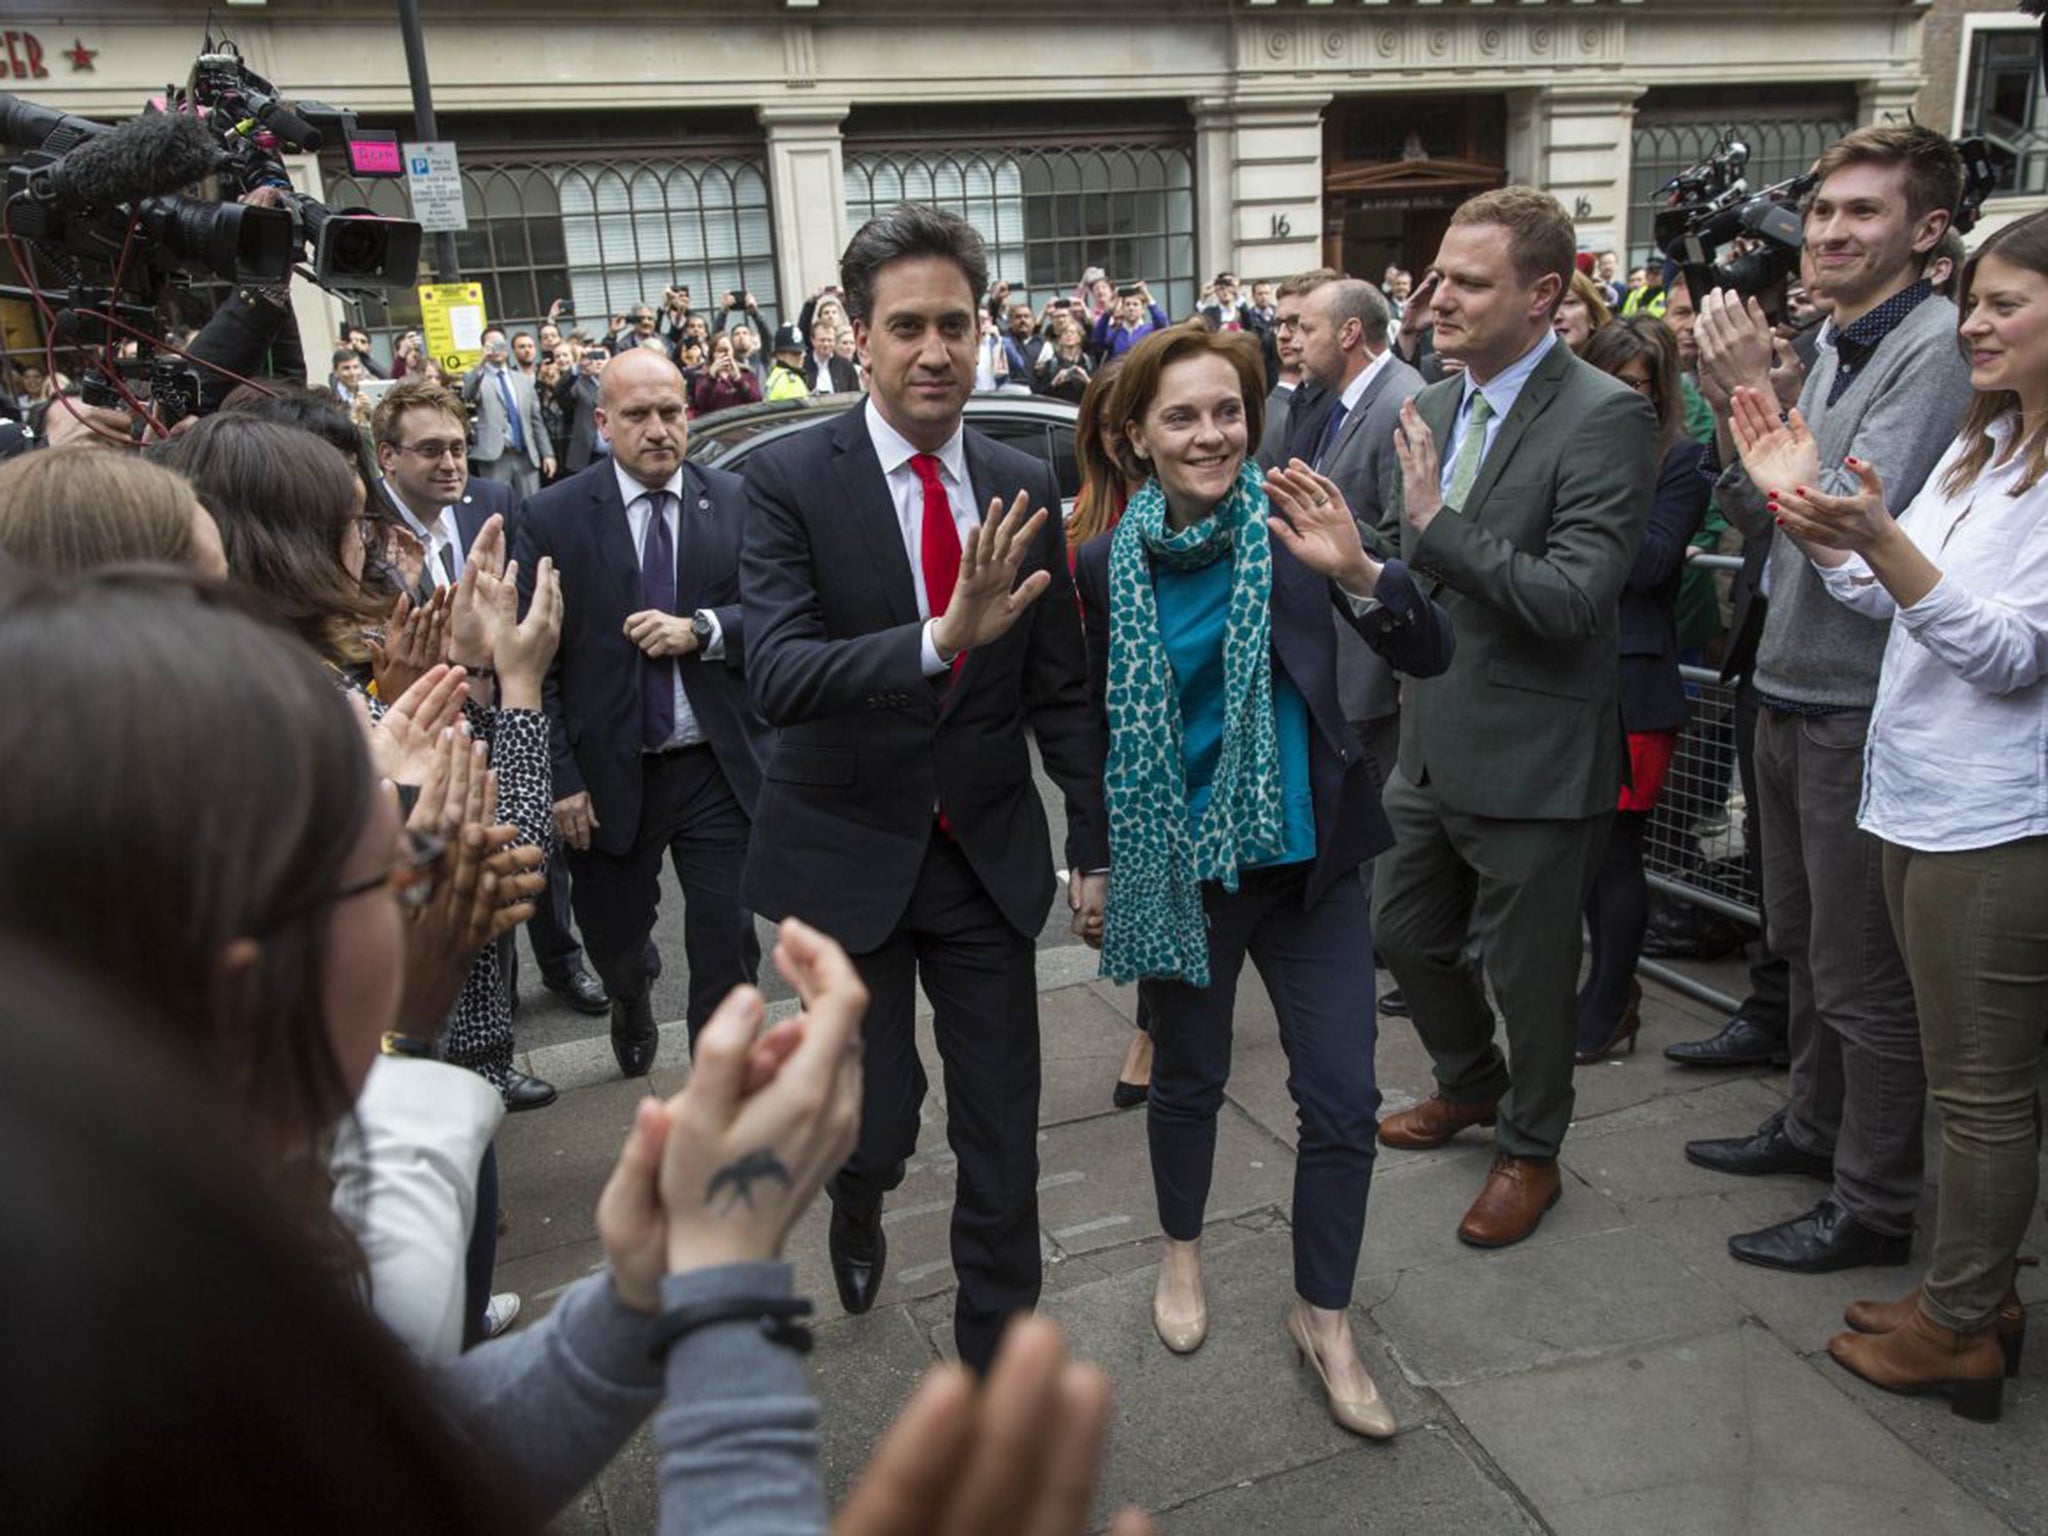 The Milibands arriving at Labour headquarters on 8 May, the day after the party lost the election